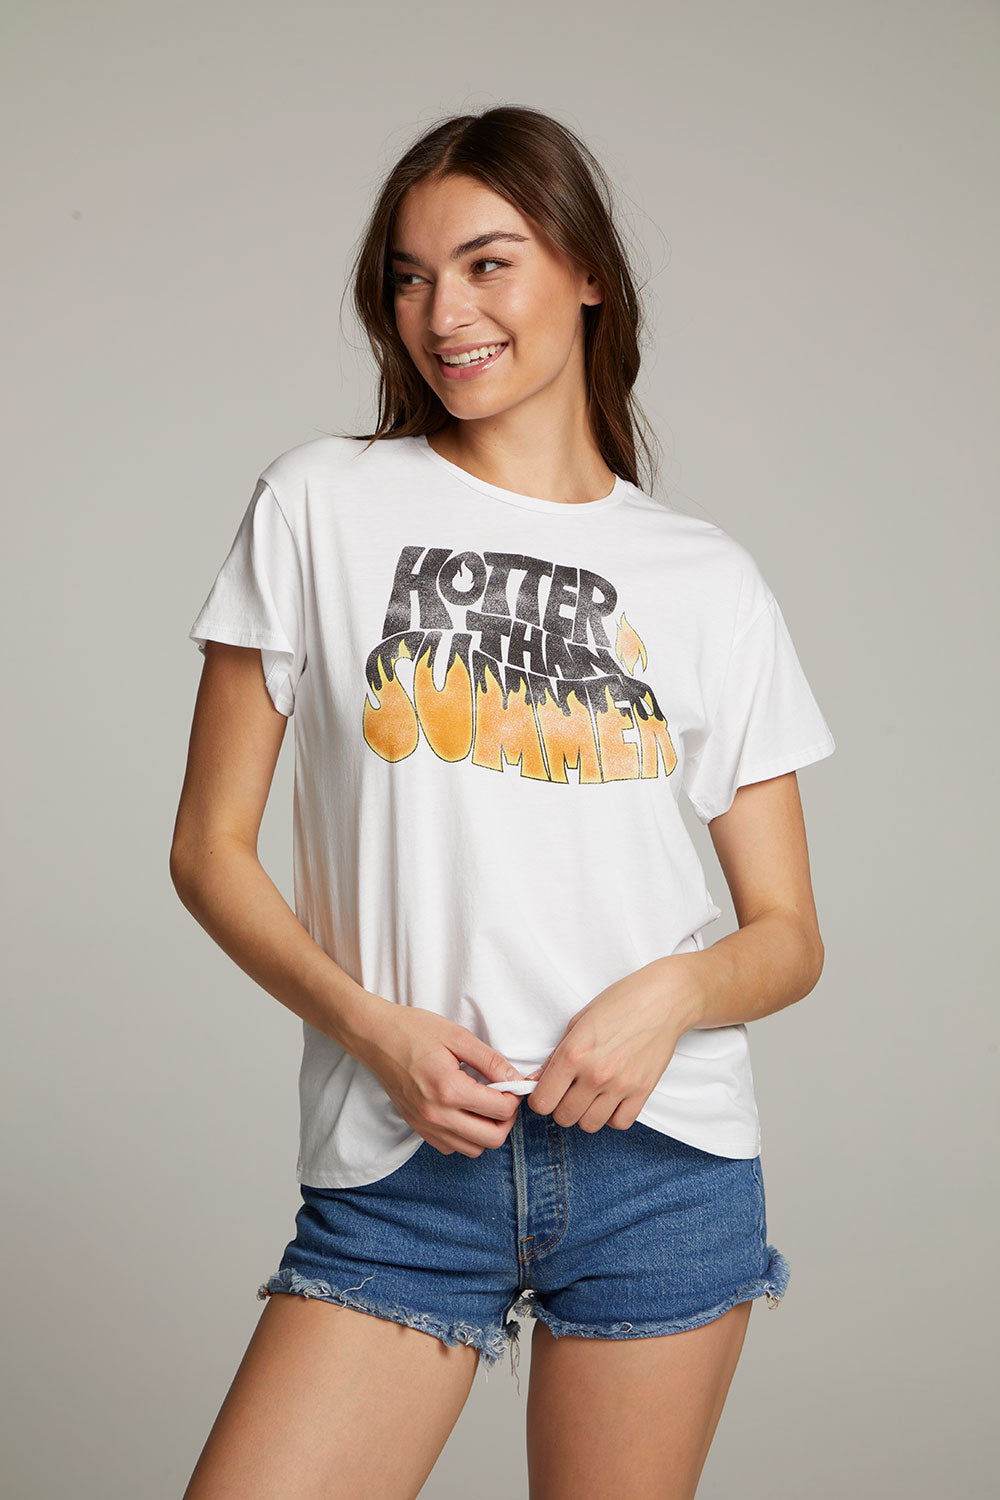 Hotter Than Summer Tee WOMENS chaserbrand